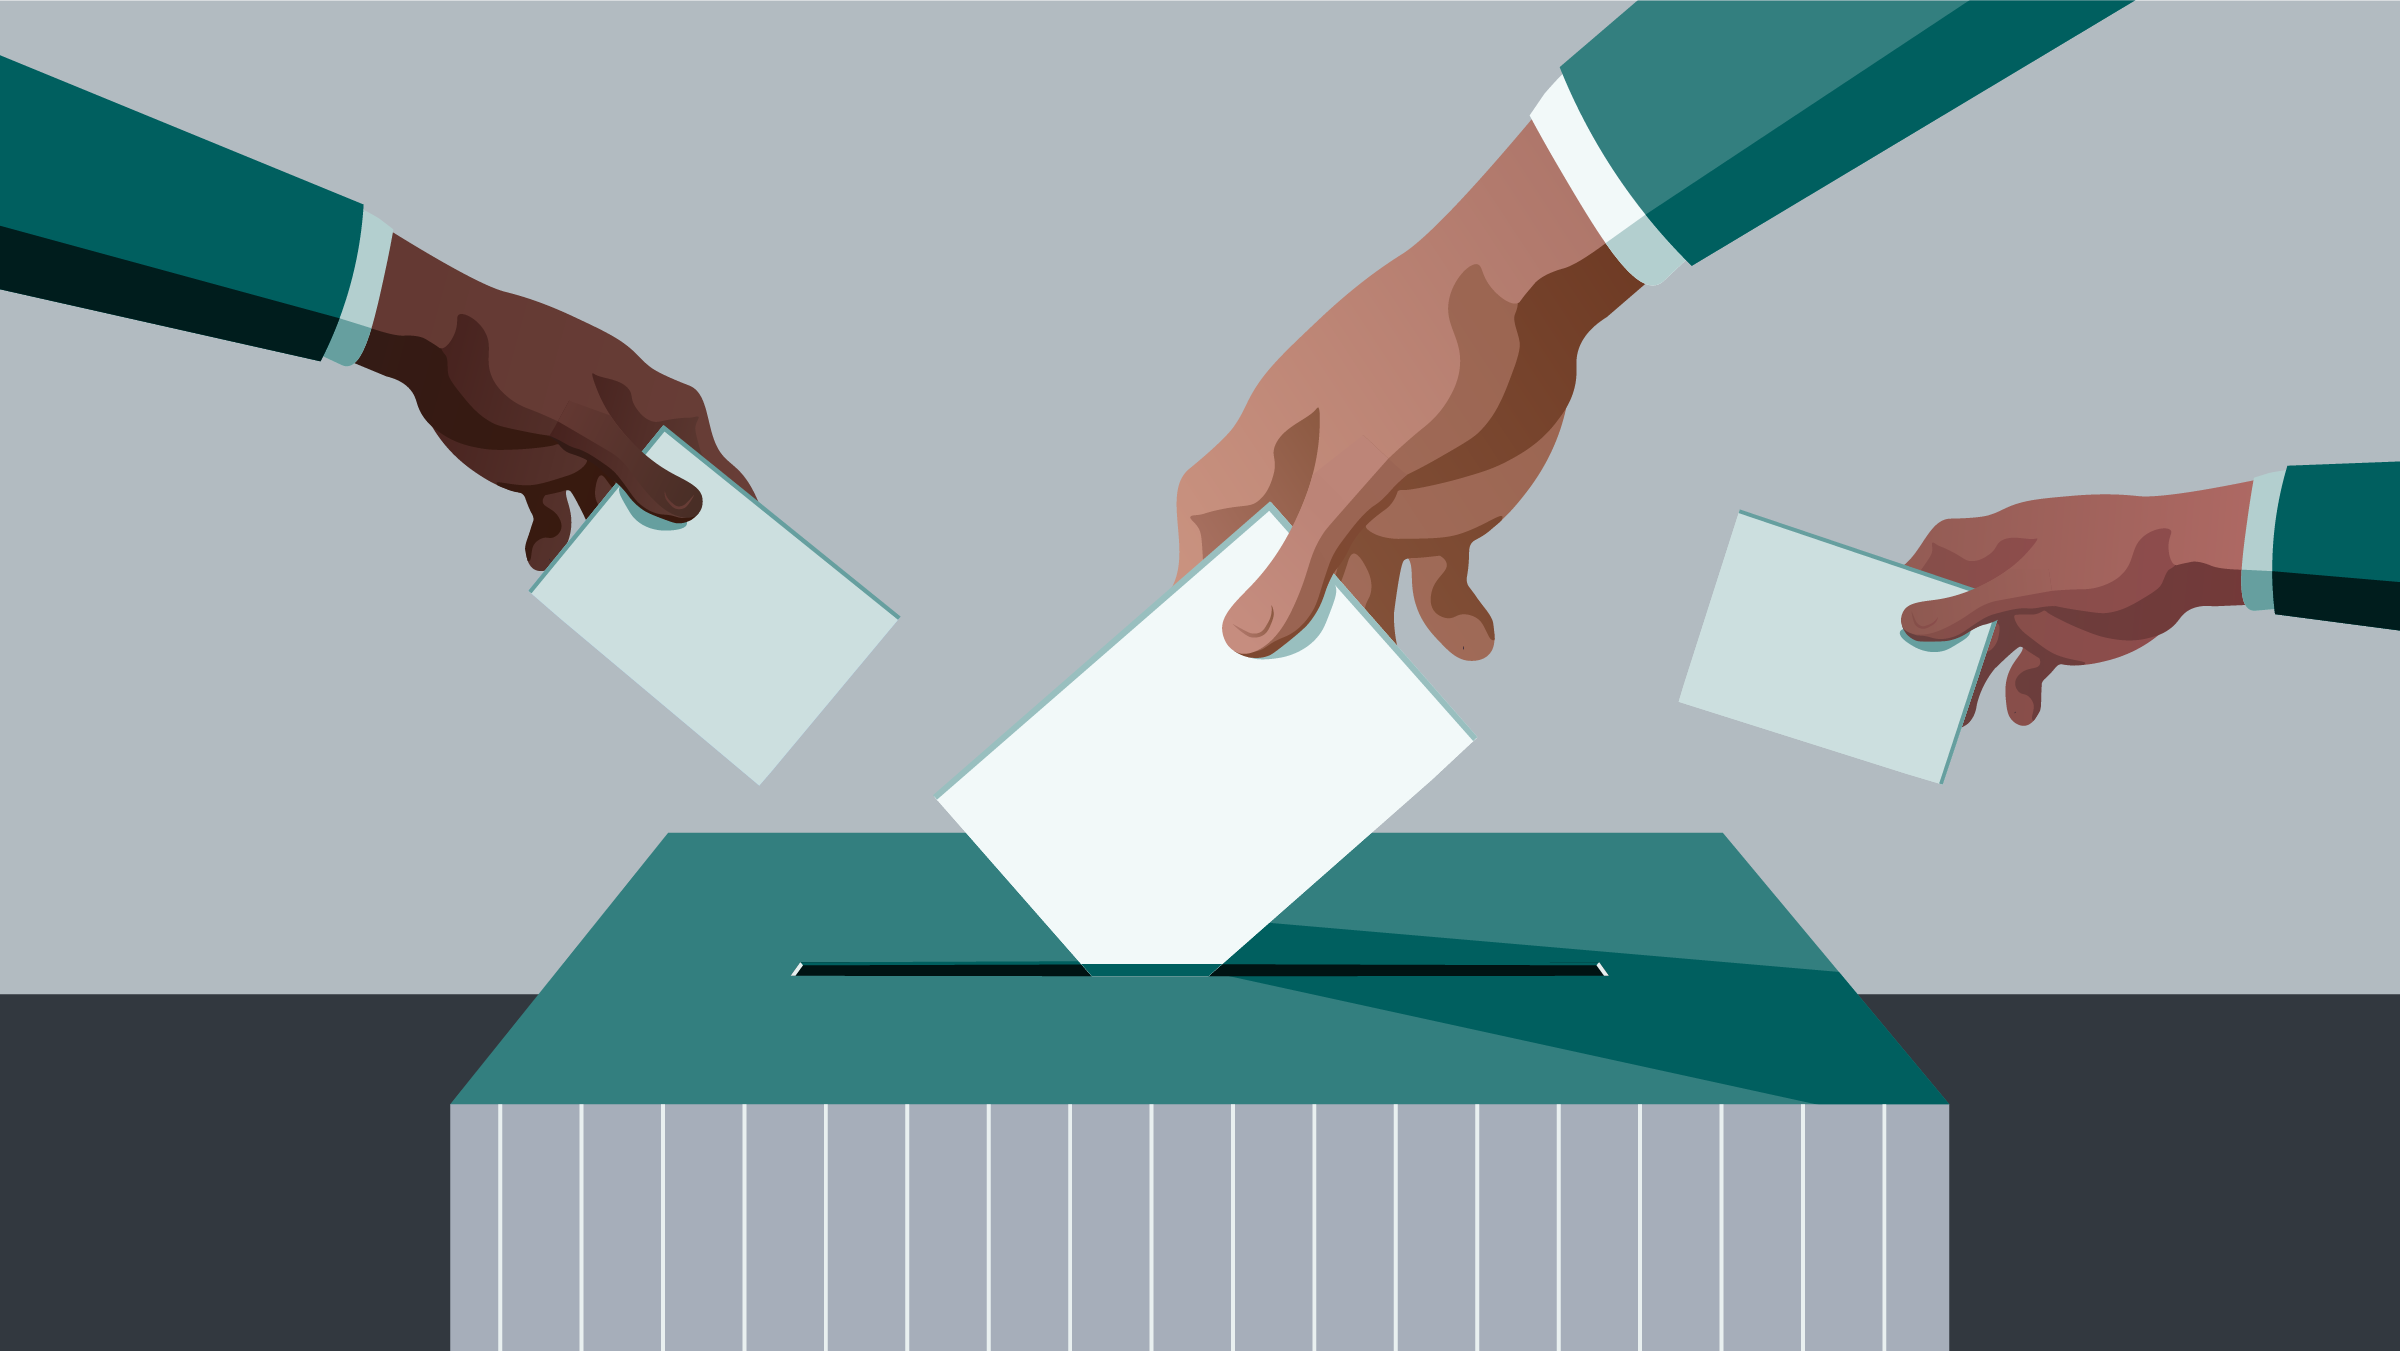 Illustration of hands placing vote in ballot